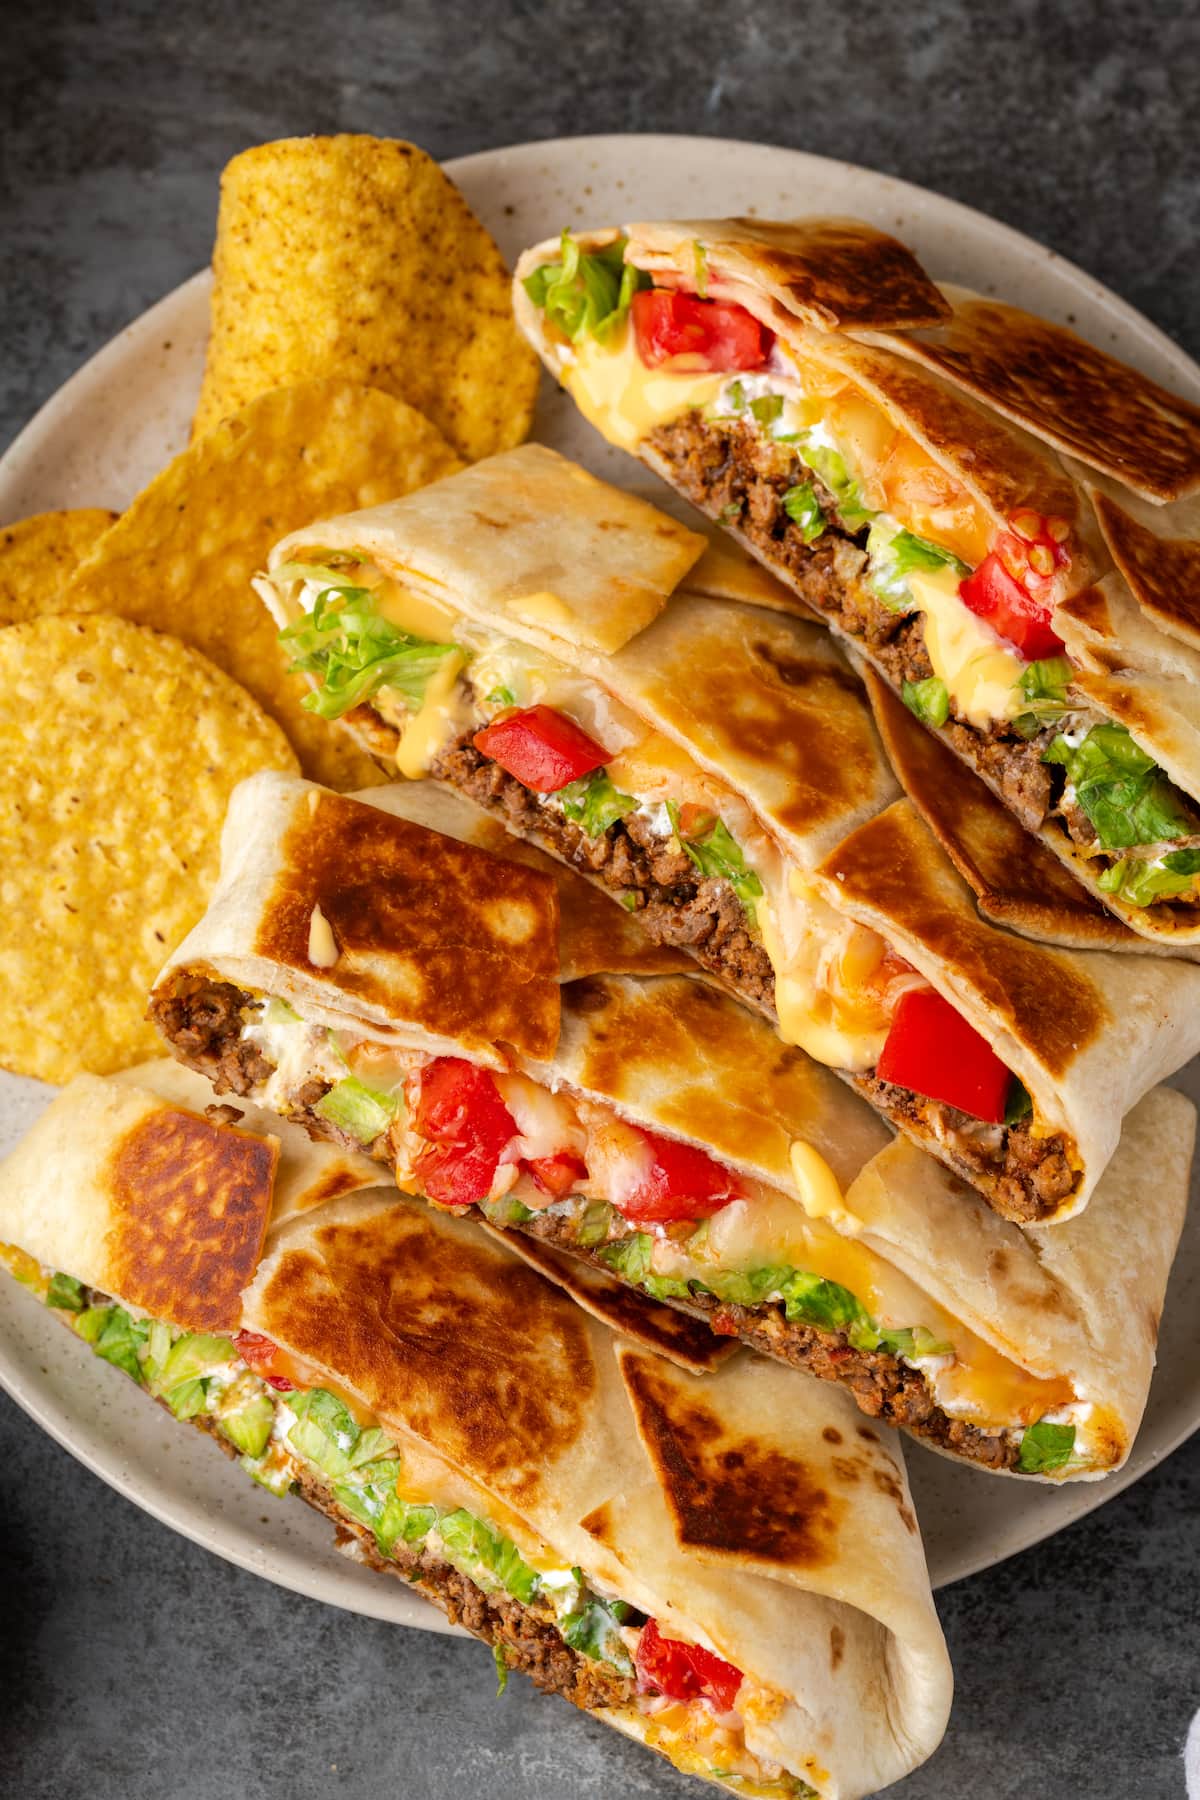 Crunch wraps cut in half and arranged in a row on a plate next to corn chips.